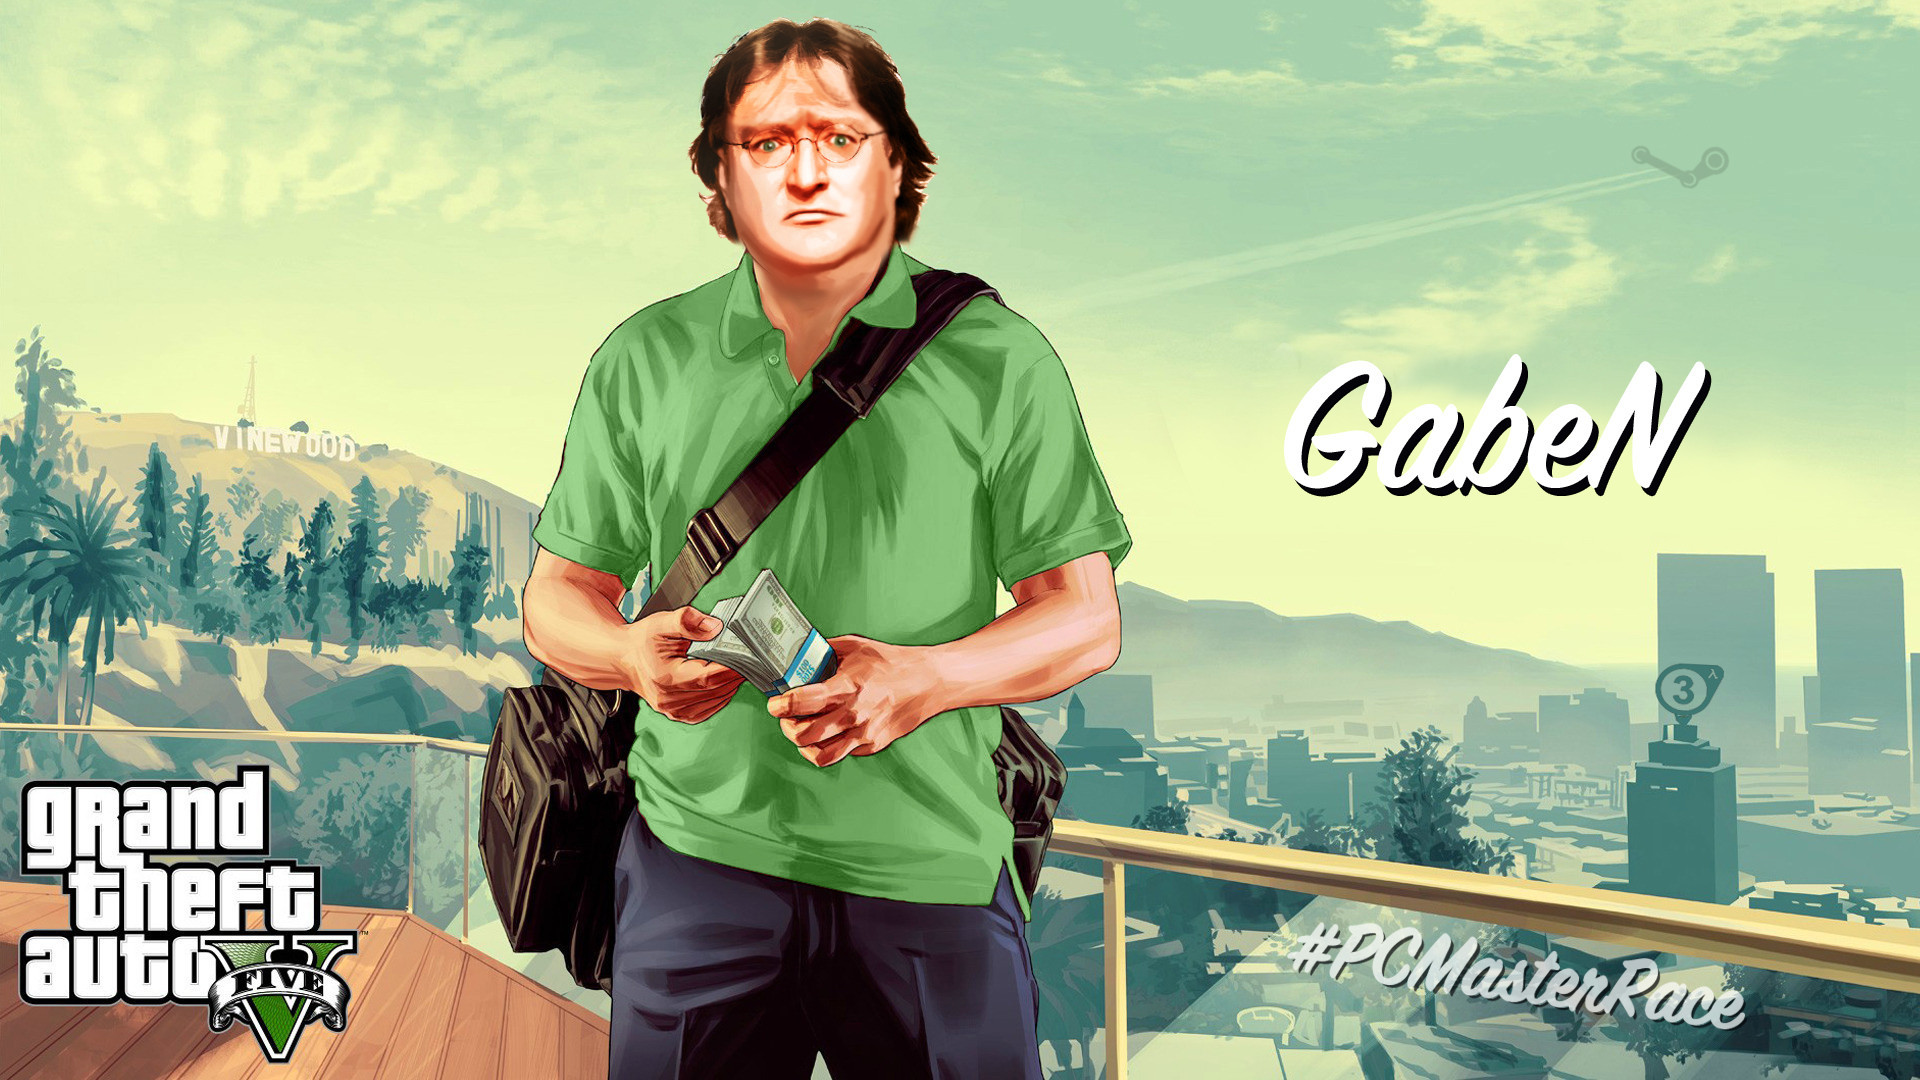 1920x1080 I Made a Glorious GabeN GTA 5 Wallpaper for All of You! ()